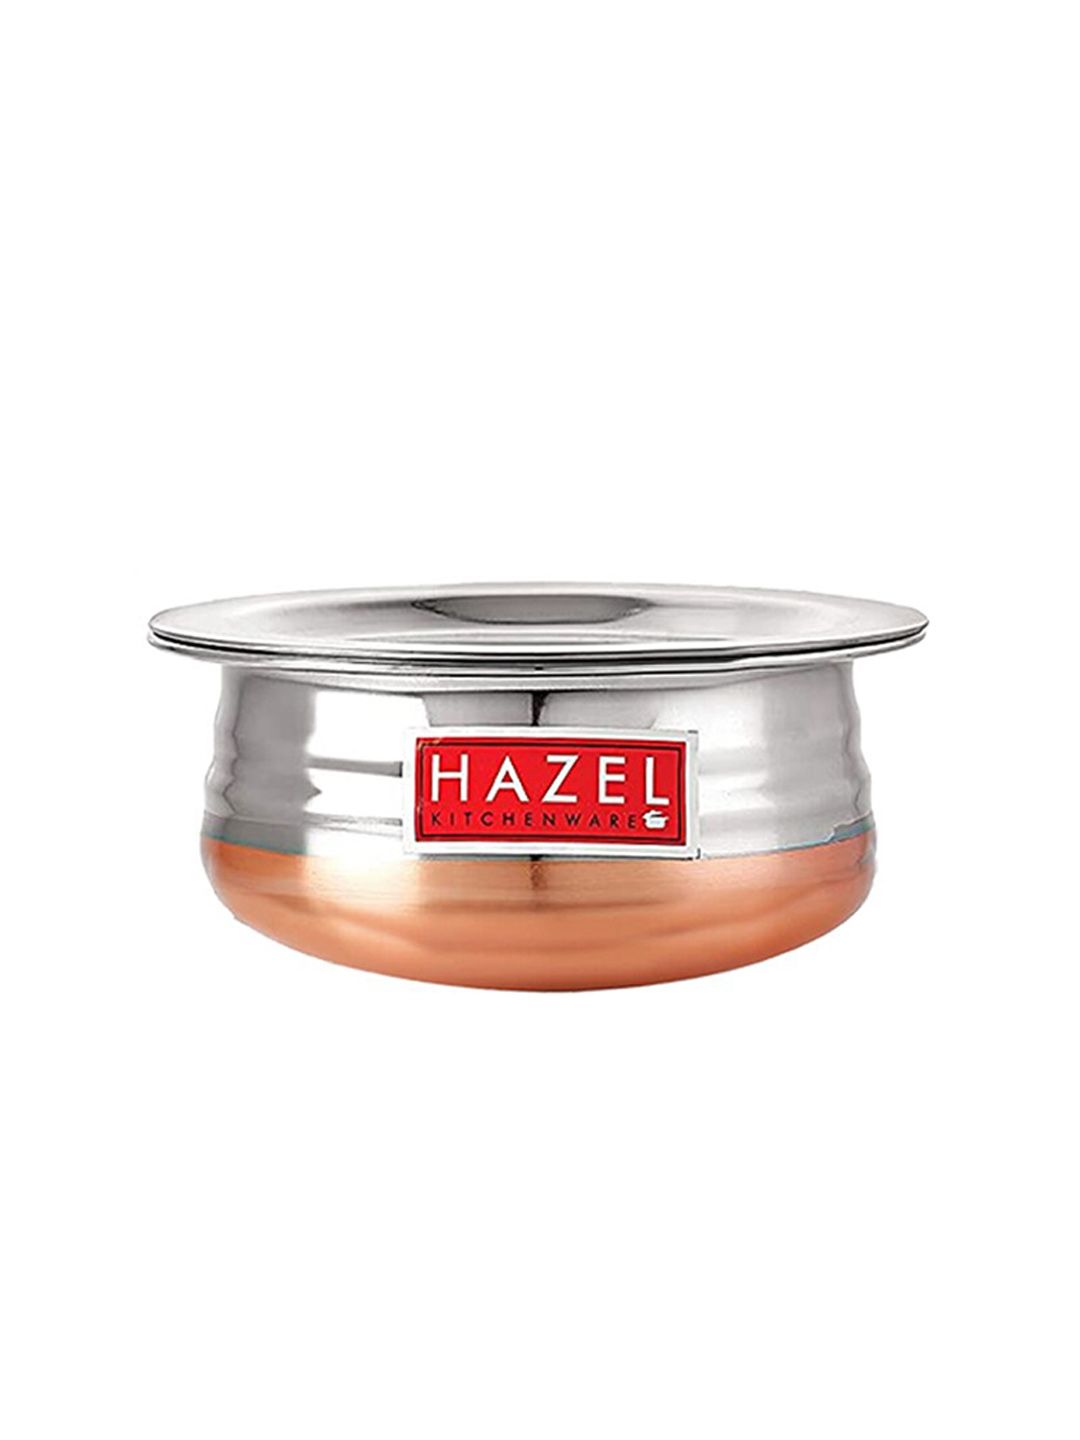 HAZEL Silver-Toned & Copper-Toned Solid Copper Bottom Urli With Lid Price in India